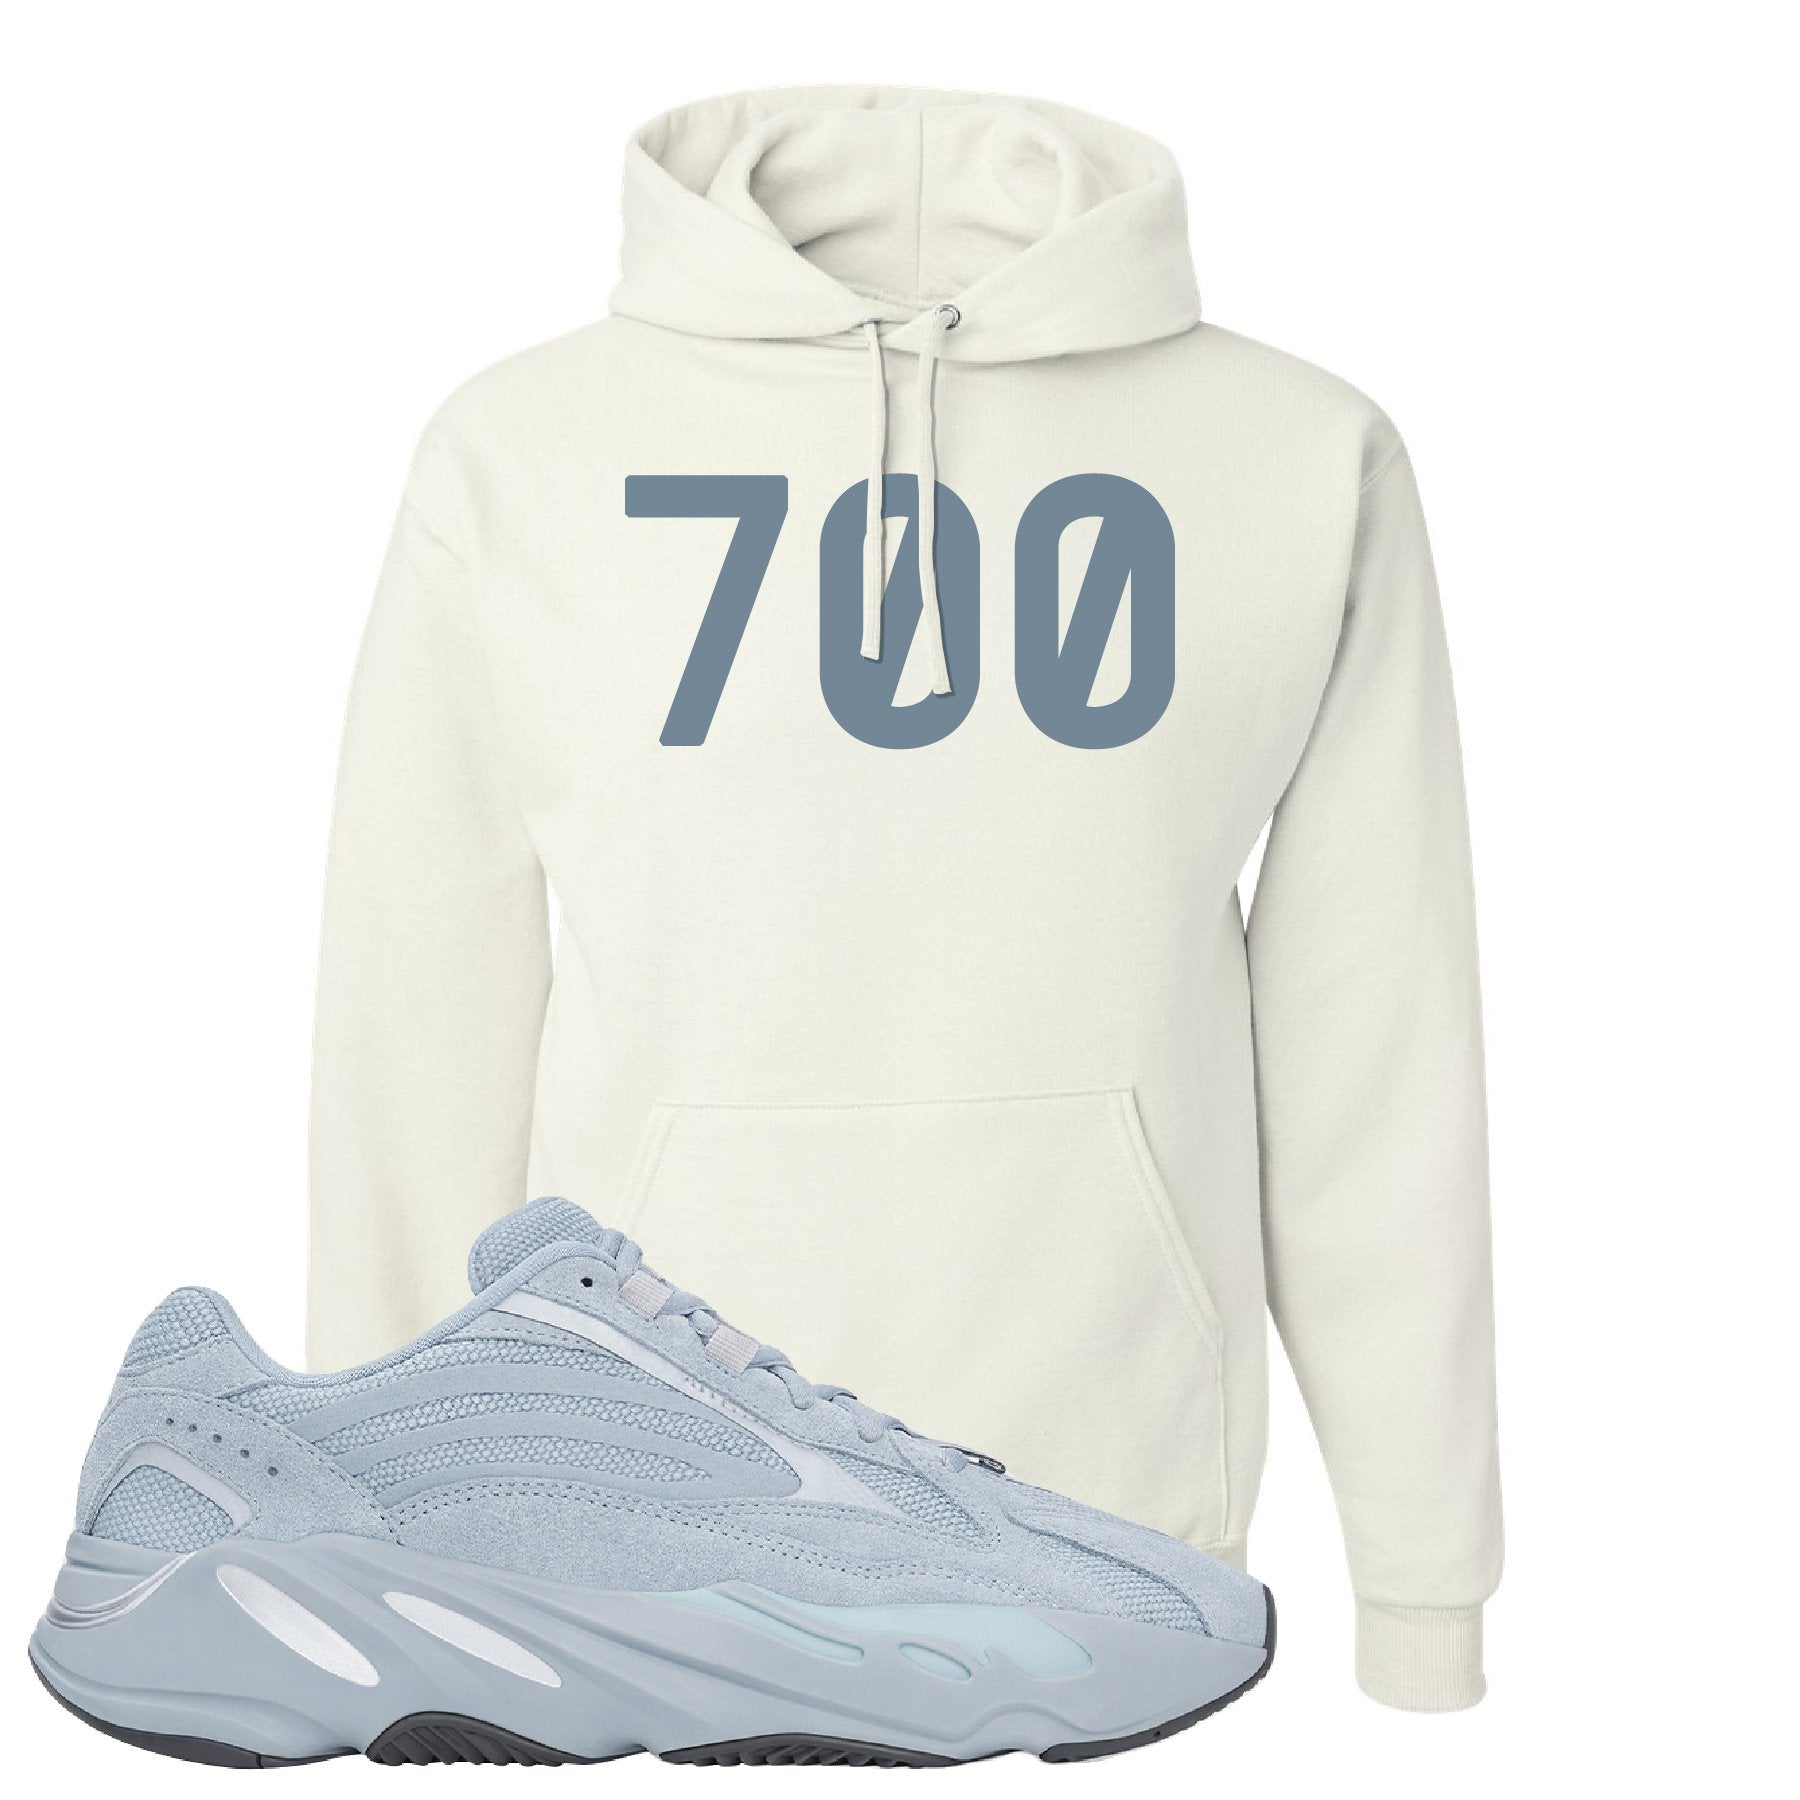 Yeezy Boost 700 V2 Hospital Blue 700 Sneaker Matching White Pullover Hoodie